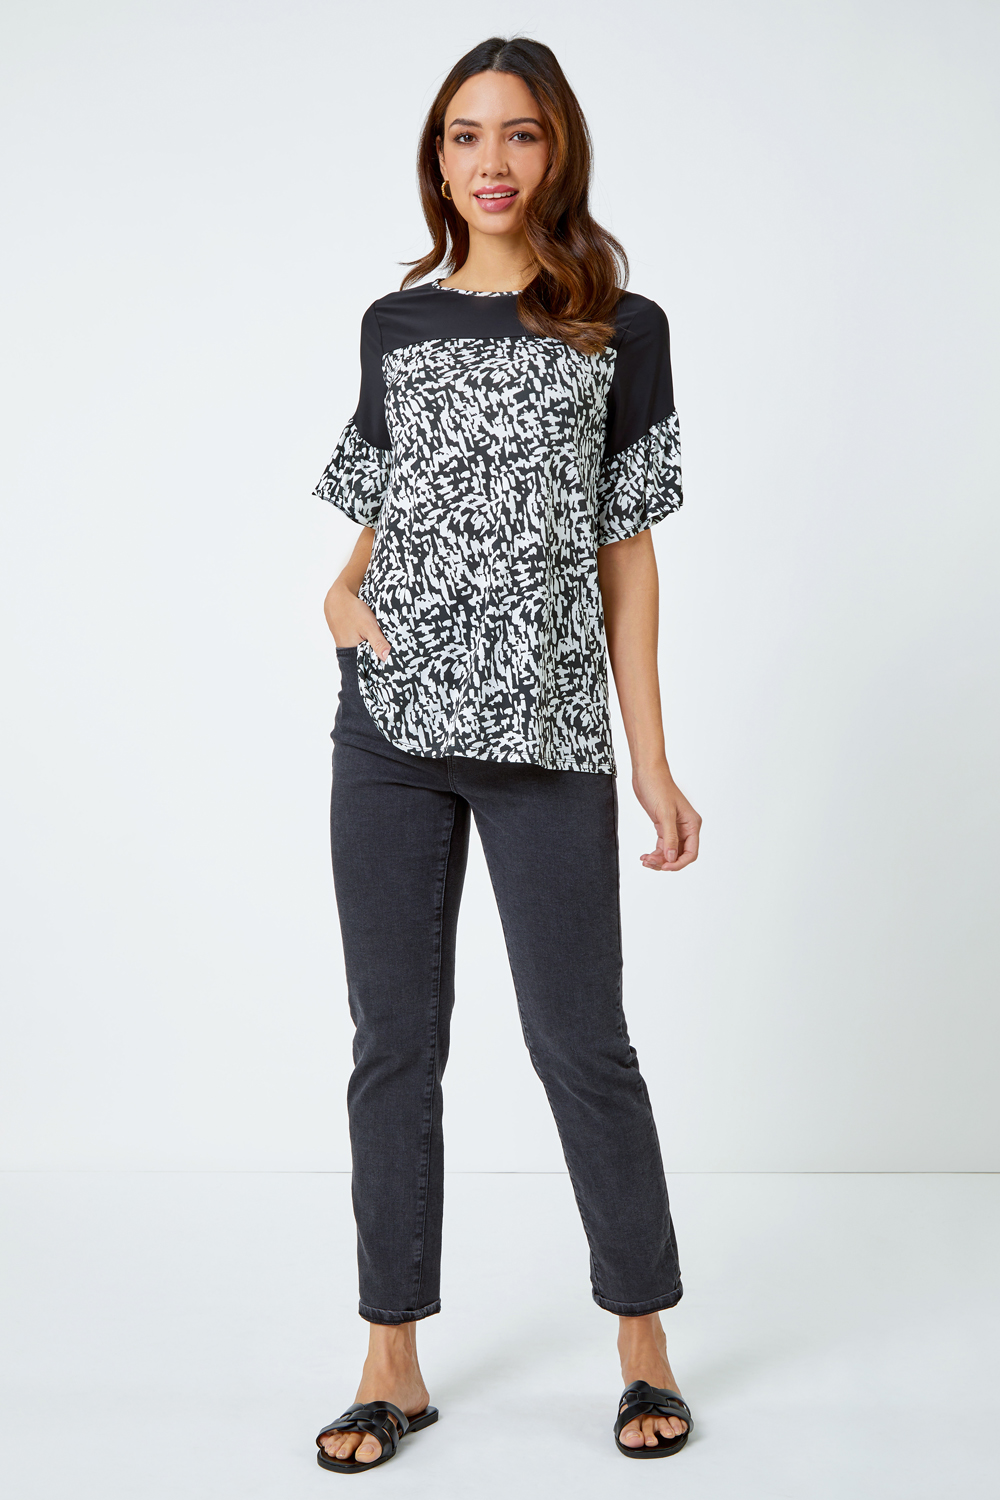 Black Contrast Frill Sleeve T-Shirt, Image 4 of 5